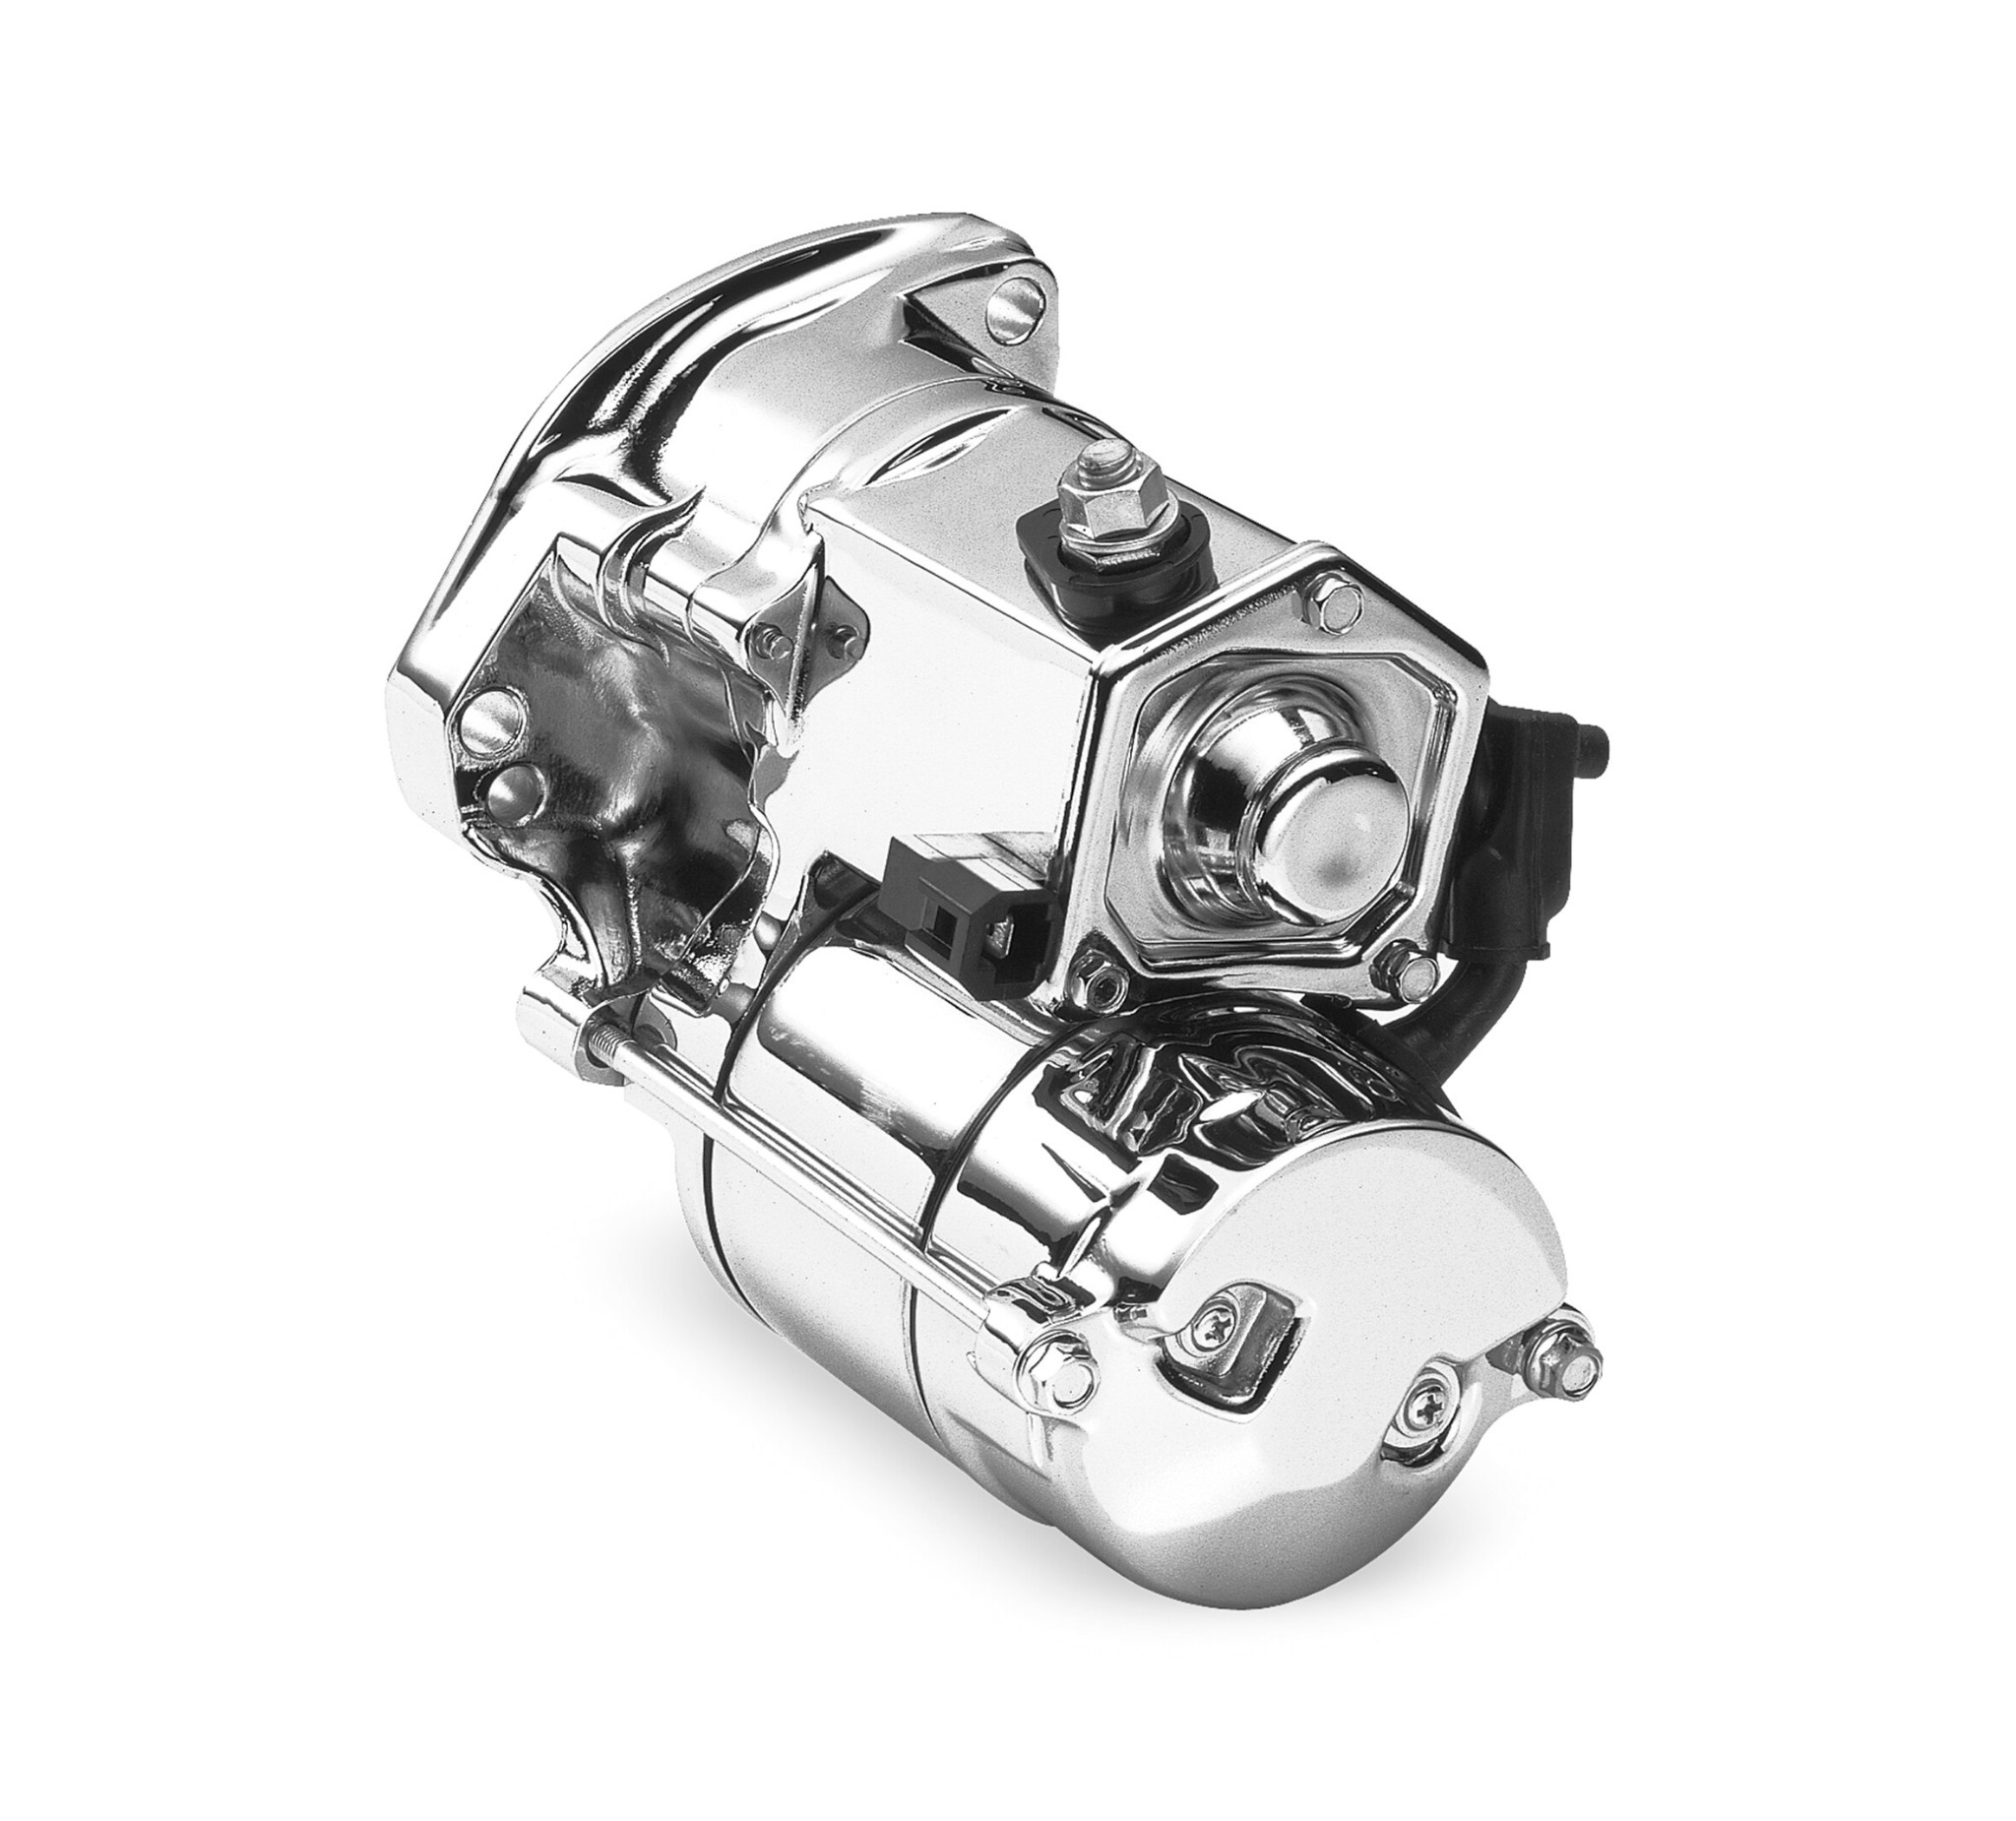 Details about   1.4 KW Chrome Starter Motor for Heritage Softail Classic Fat Boy DYNA Road Glide